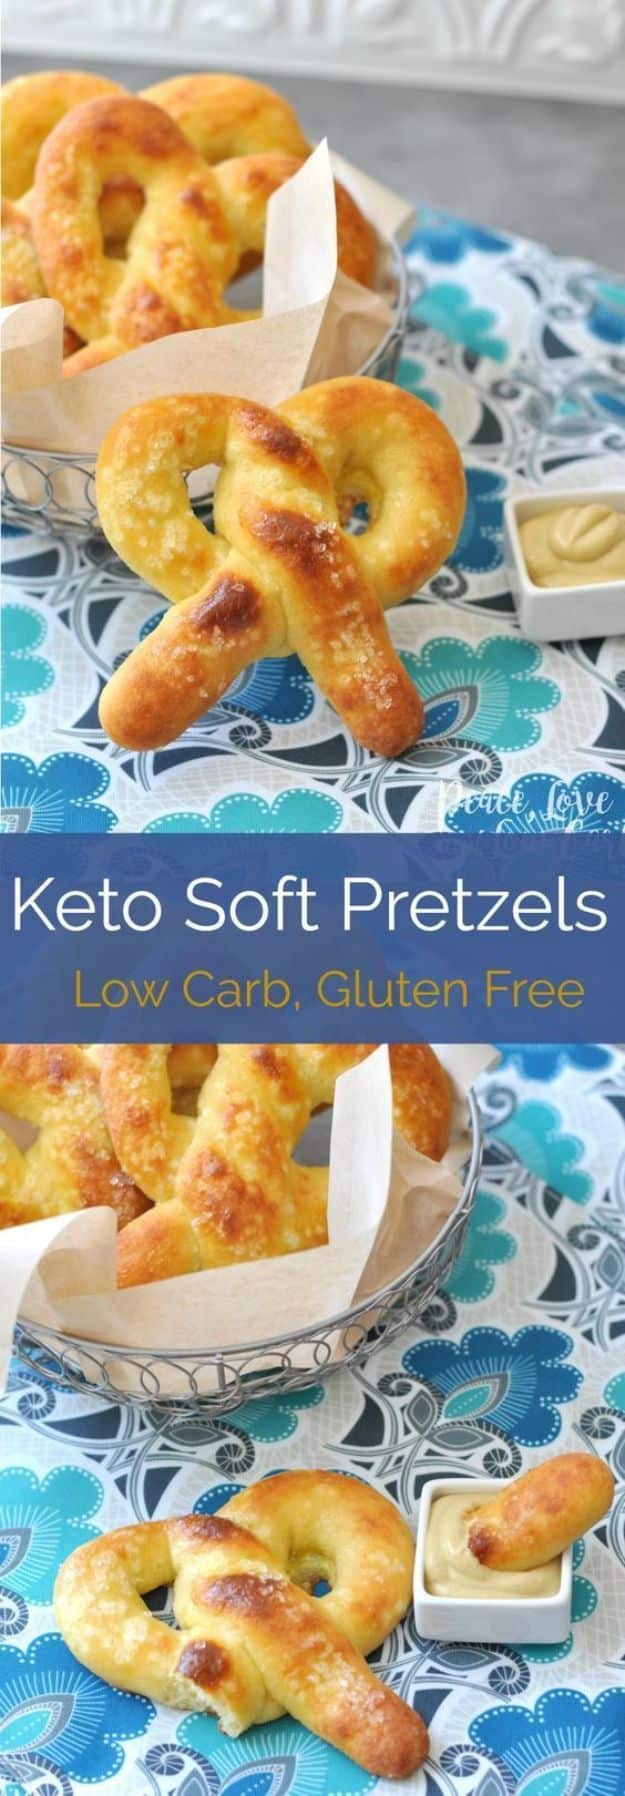 Keto Breakfast Recipes - Keto Soft Pretzel - Low Carb Breakfasts and Morning Meals for the Ketogenic Diet - Low Carbohydrate Foods on the Go - Easy Crockpot Recipes and Casserole - Muffins and Pancakes, Shake and Smoothie, Ideas With No Eggs #keto